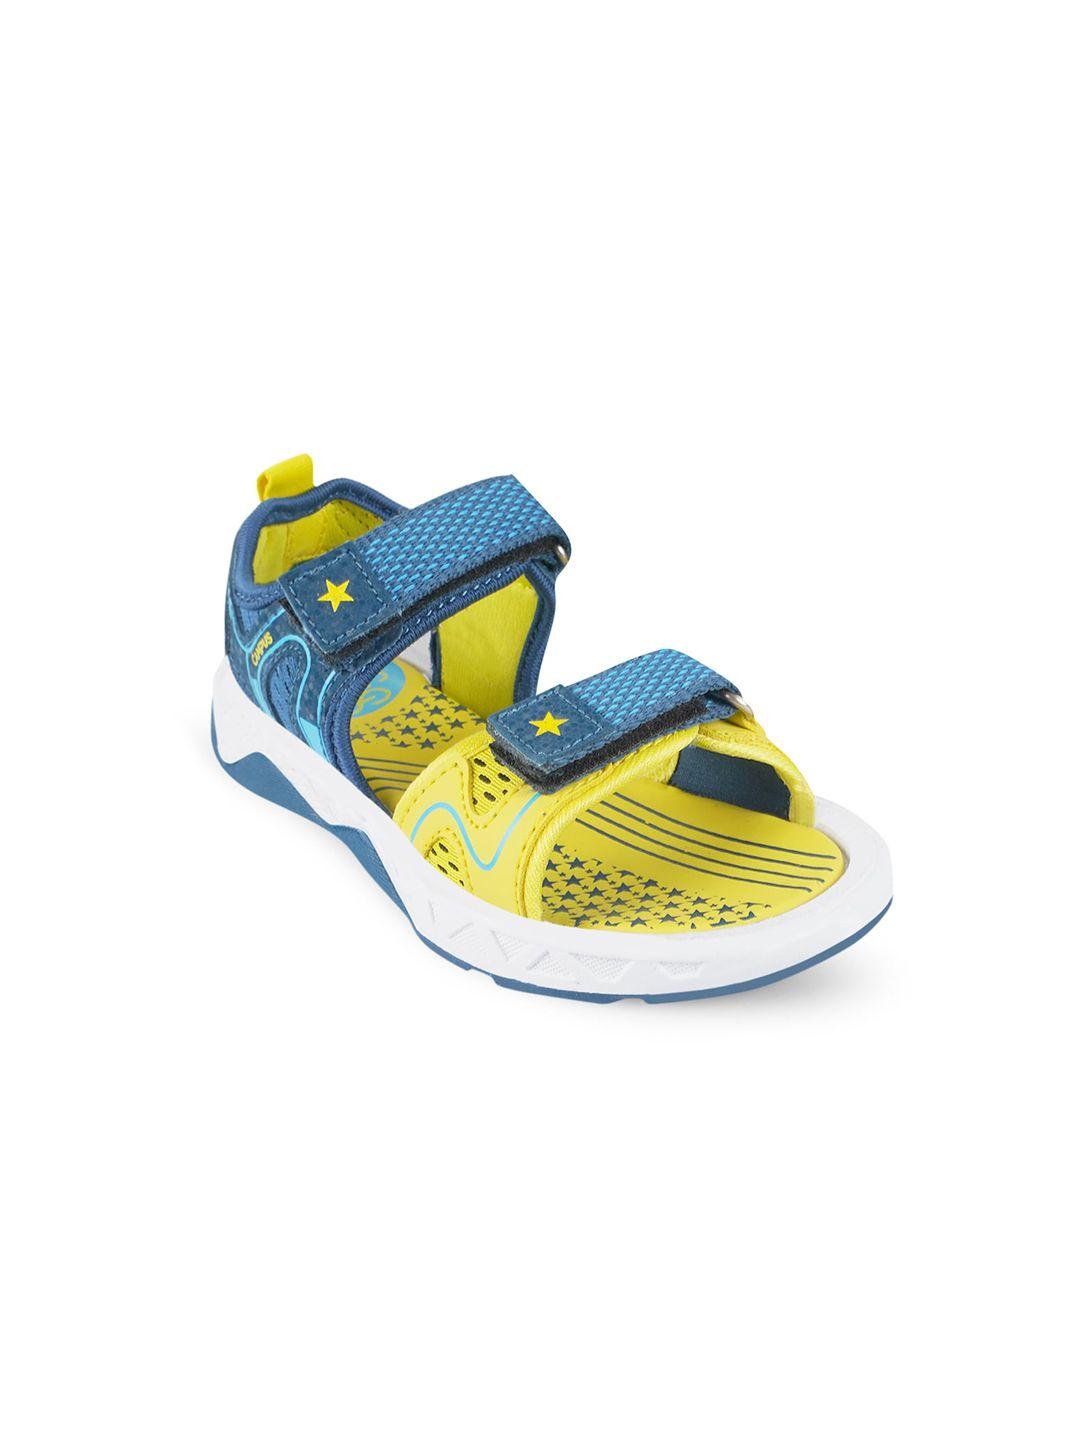 campus kids blue & yellow solid sports sandals